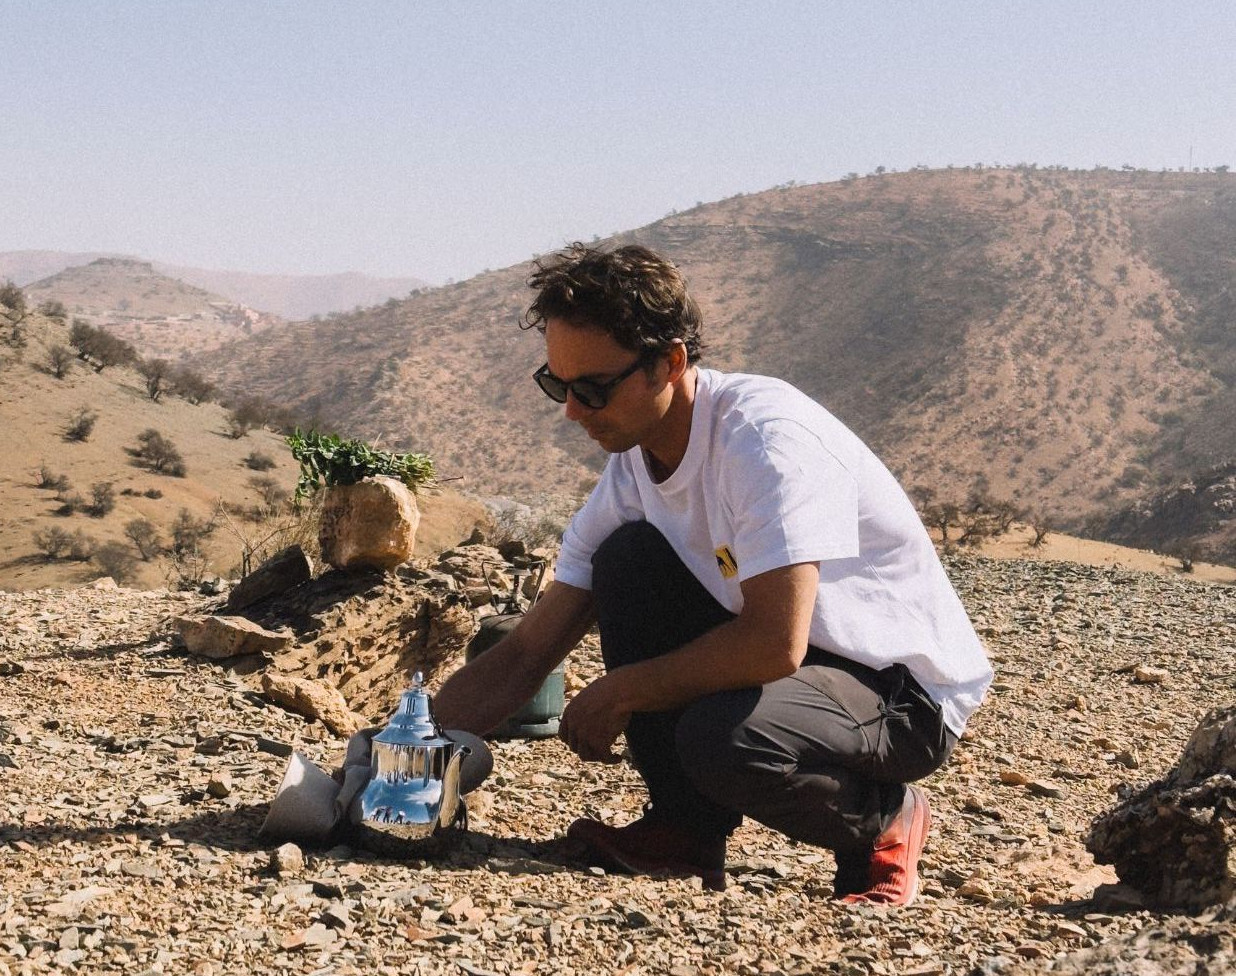 Tim, the founder of Bookinglayer, making mint tea in the desert.